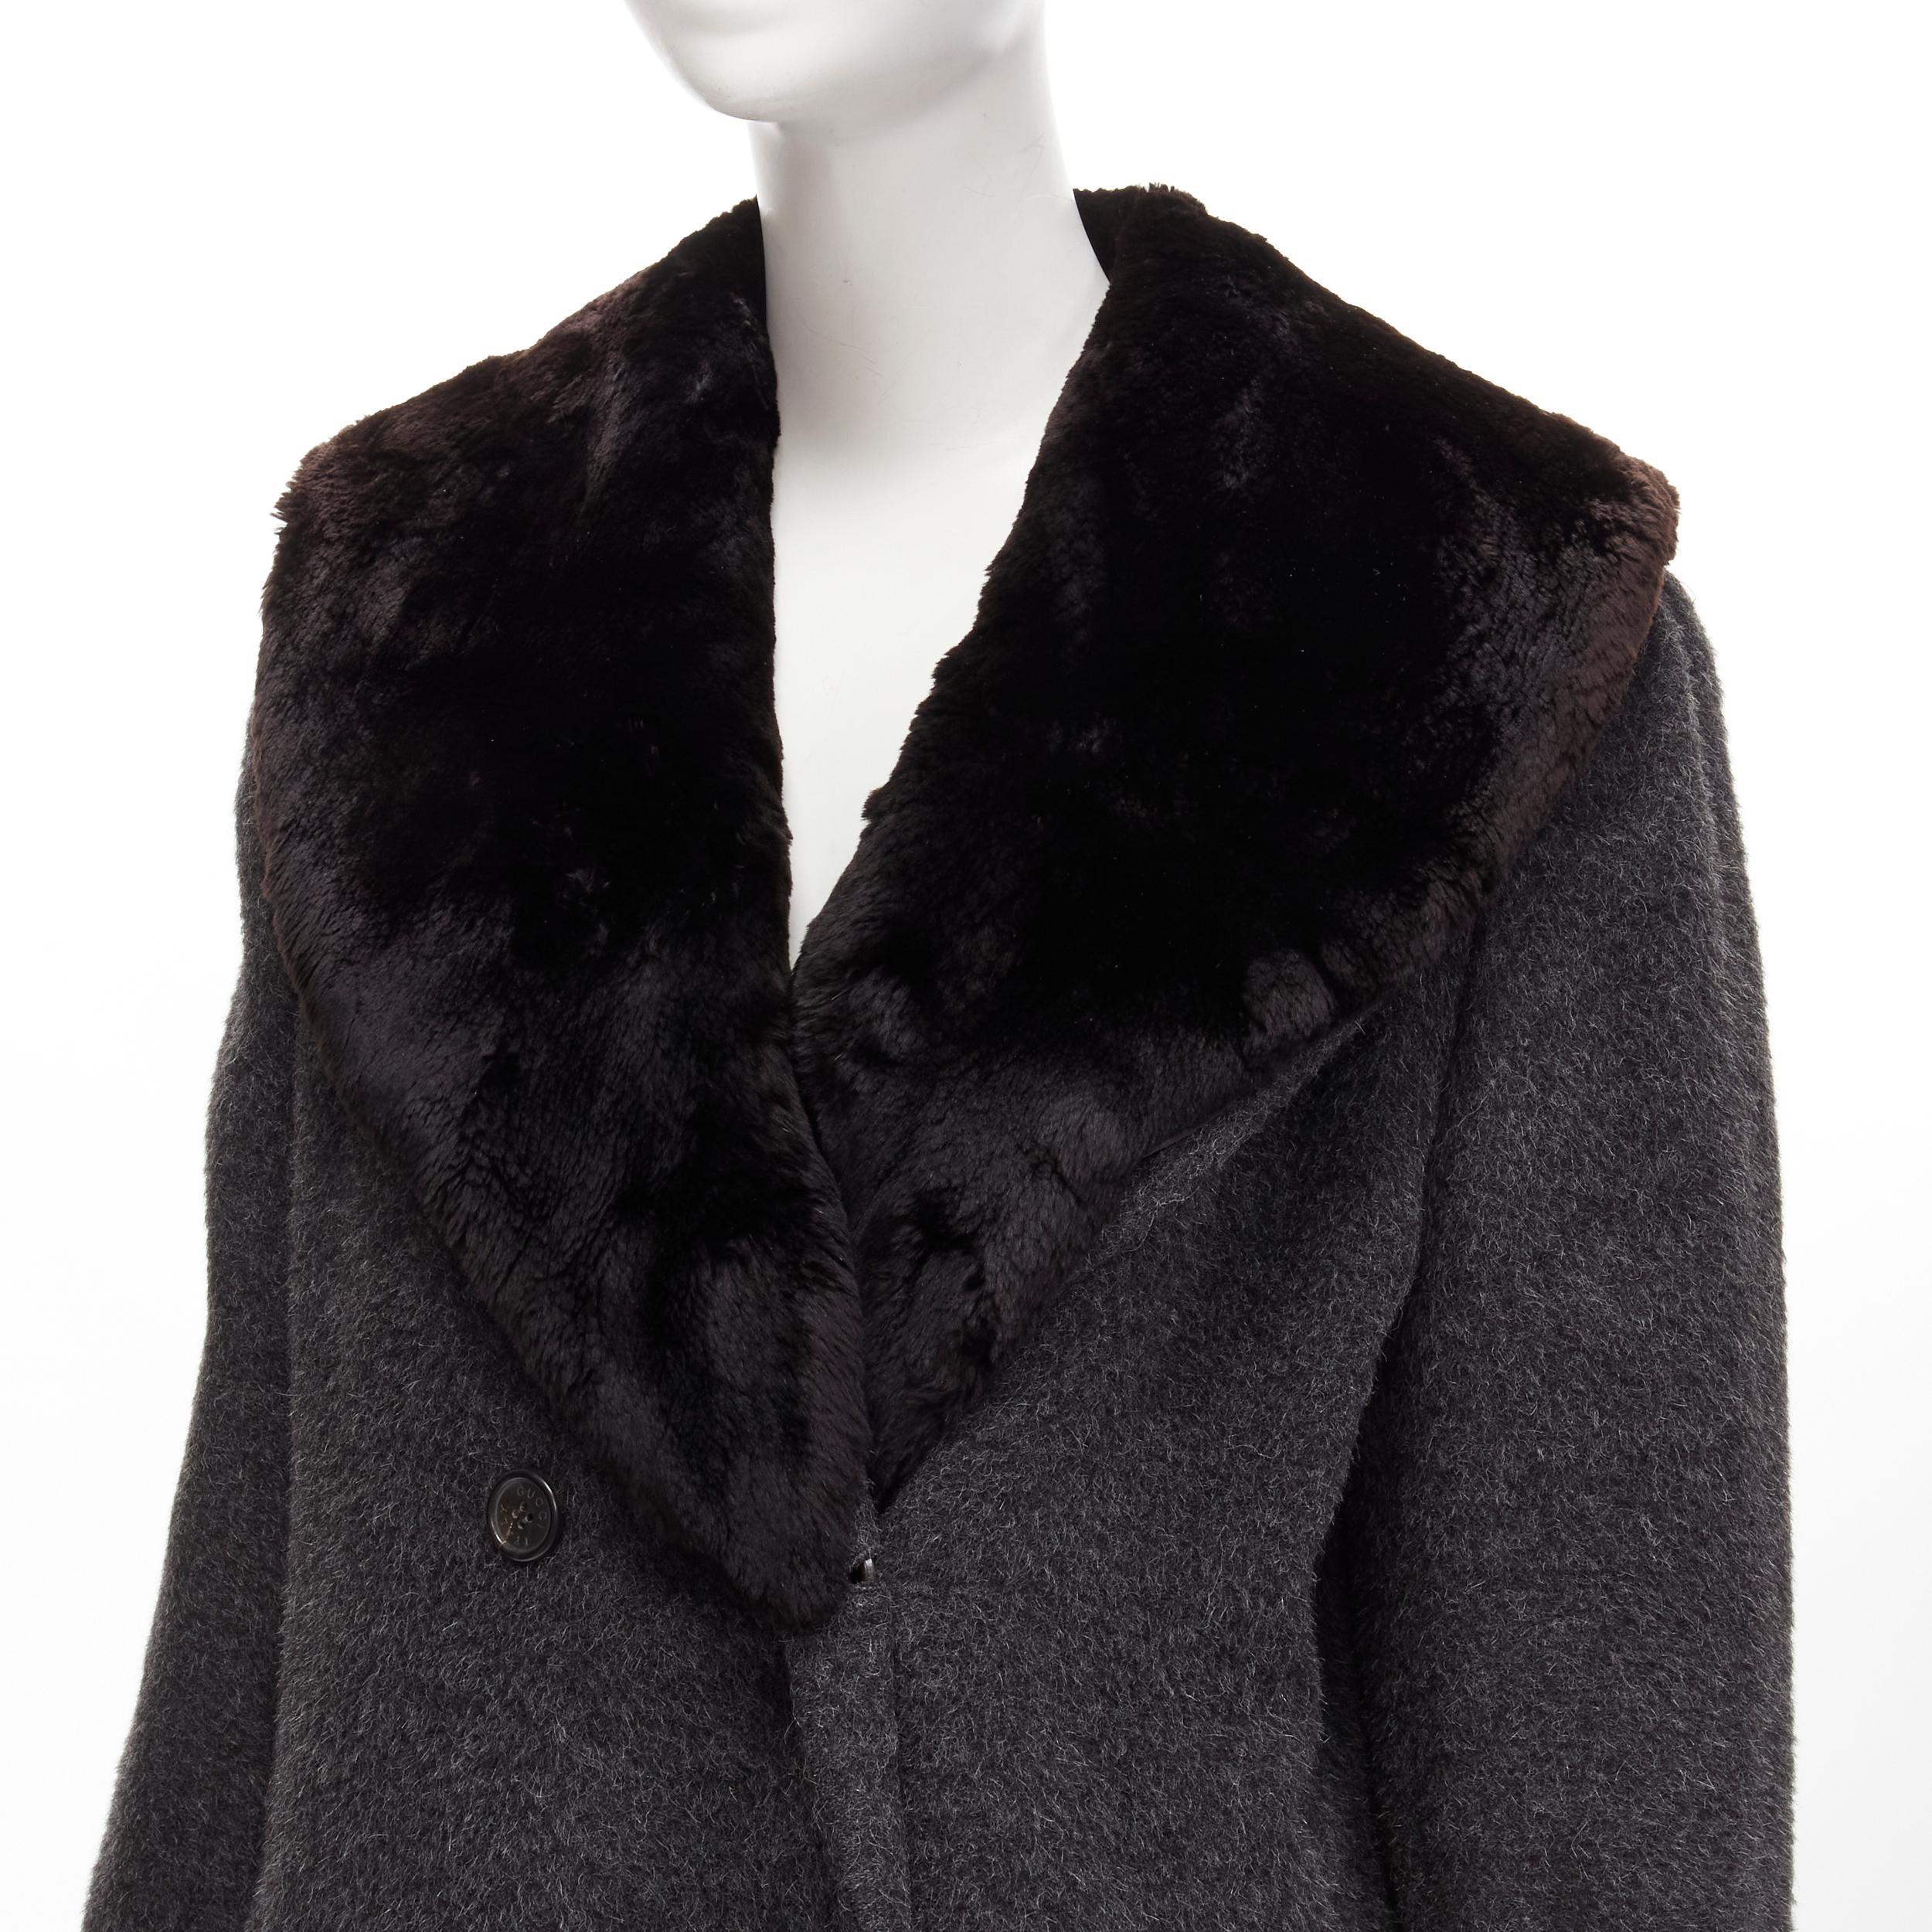 GUCCI Tom Ford Vintage grey alpaca fur collar double brested winter coat IT42 M
Reference: TGAS/C01629
Brand: Gucci
Designer: Tom Ford
Material: Alpaca, Blend
Color: Grey
Pattern: Solid
Closure: Button
Lining: Fabric
Extra Details: Belt loop for